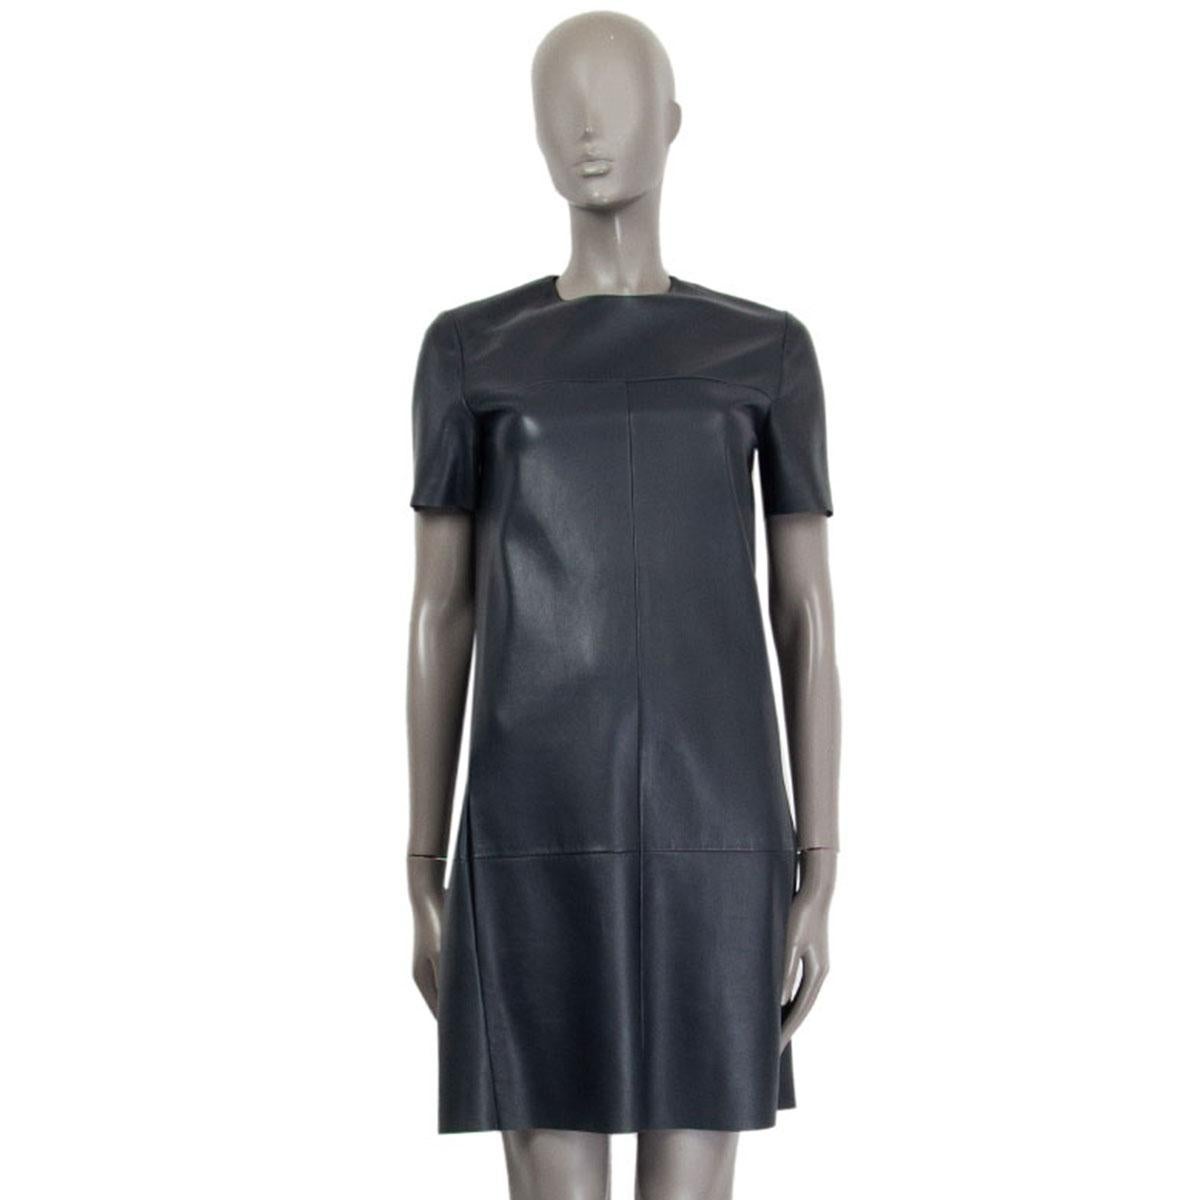 authentic Celine short sleeves shift dress in pigeon blue lambskin leather (100%) with round neck-line and seams detail at the front. Closes with a zipper on the back and has slit pockets at the front hips. Unlined. Has been worn and is in excellent